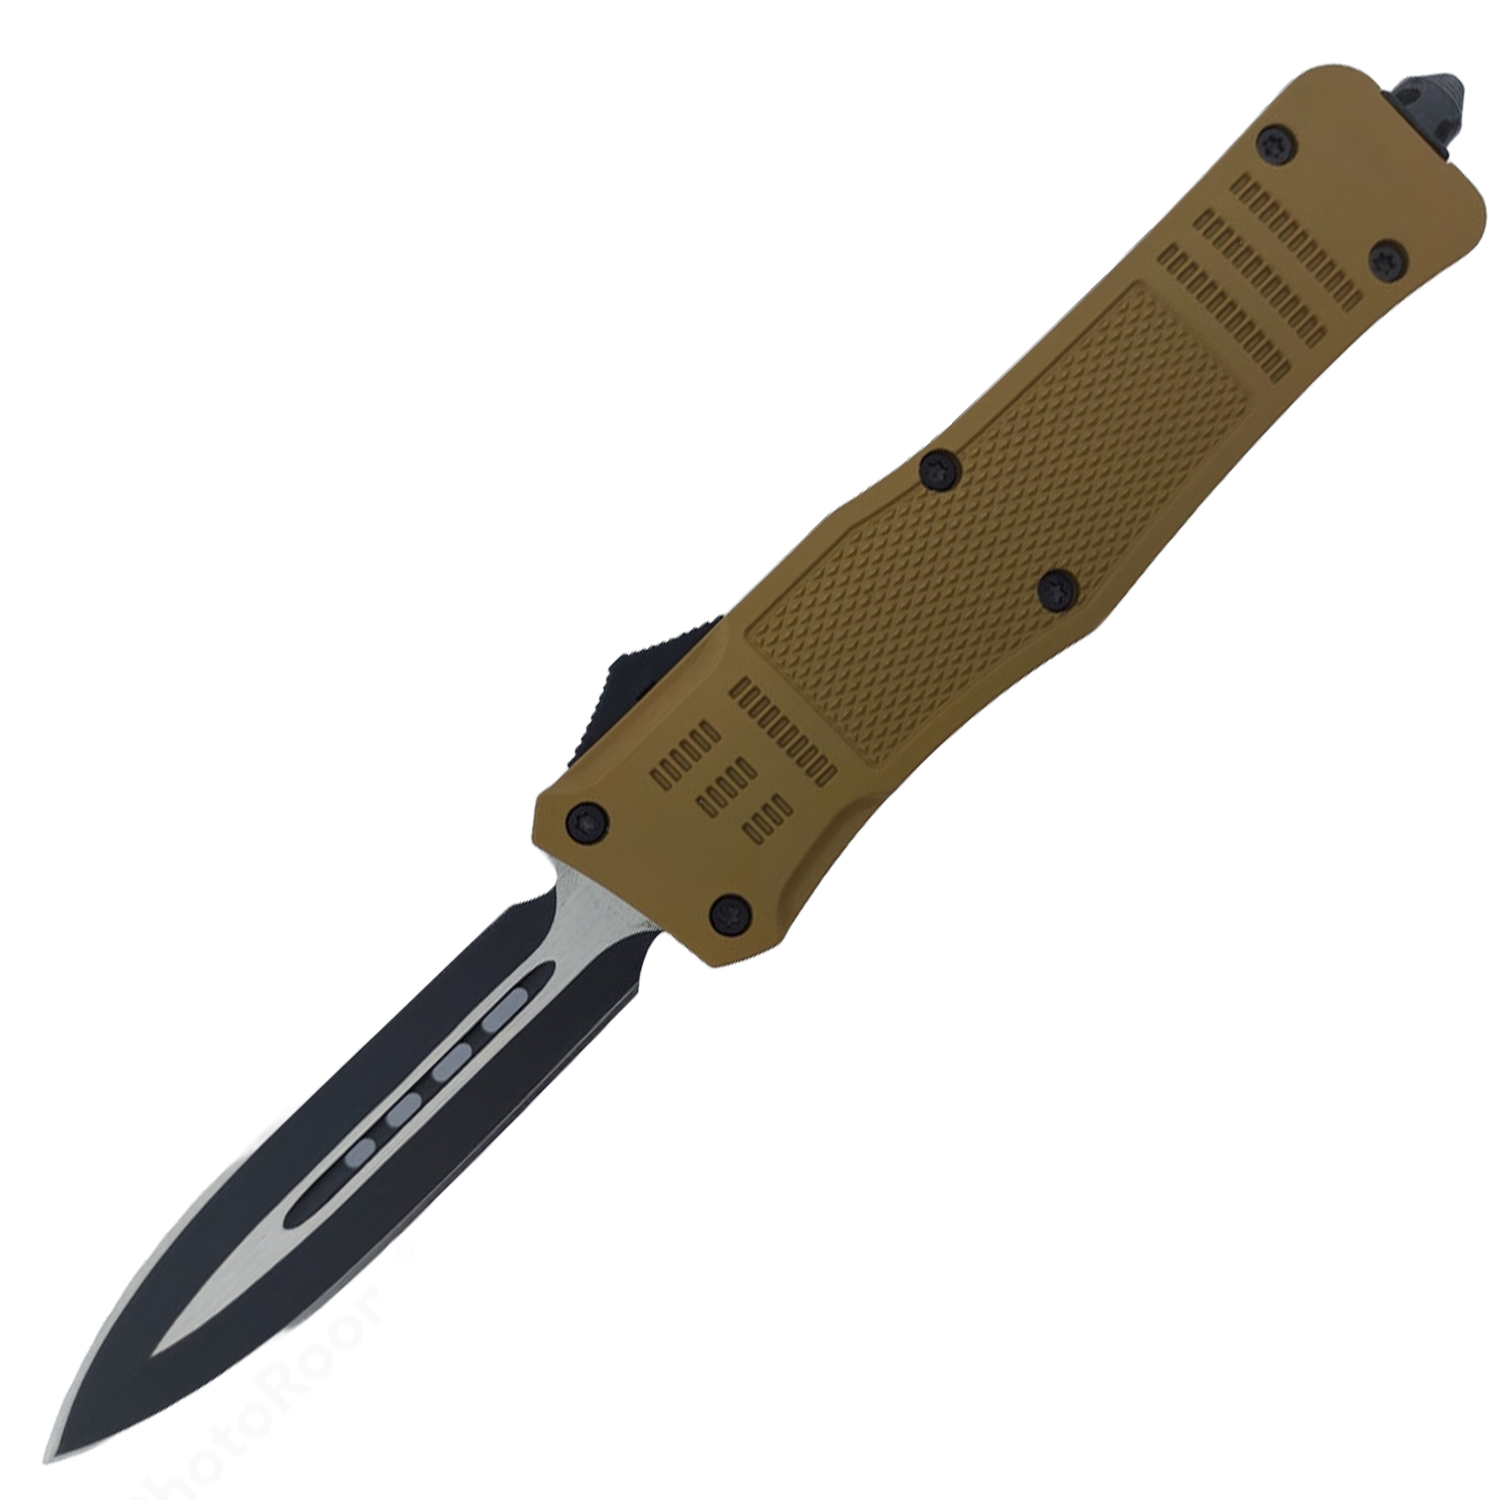 Covert OPS USA OTF Automatic Knife 9 inch Tan D2 Steel Blade Double Edge